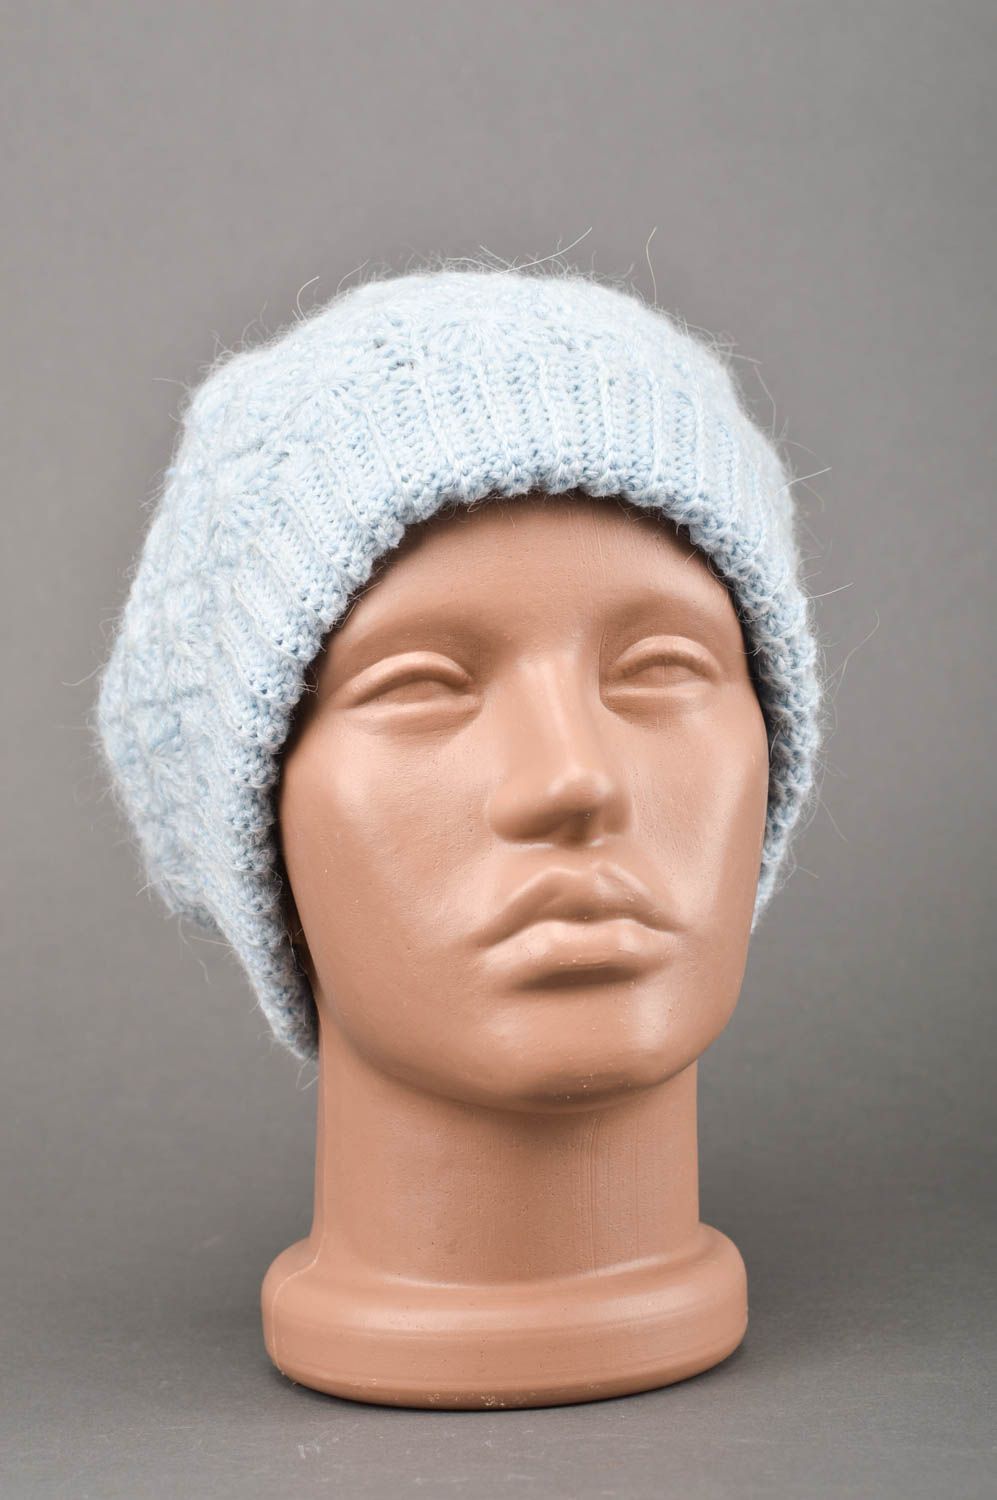 Crocheted hat handmade winter hat beanie hats for women fashion hats cool gifts photo 1